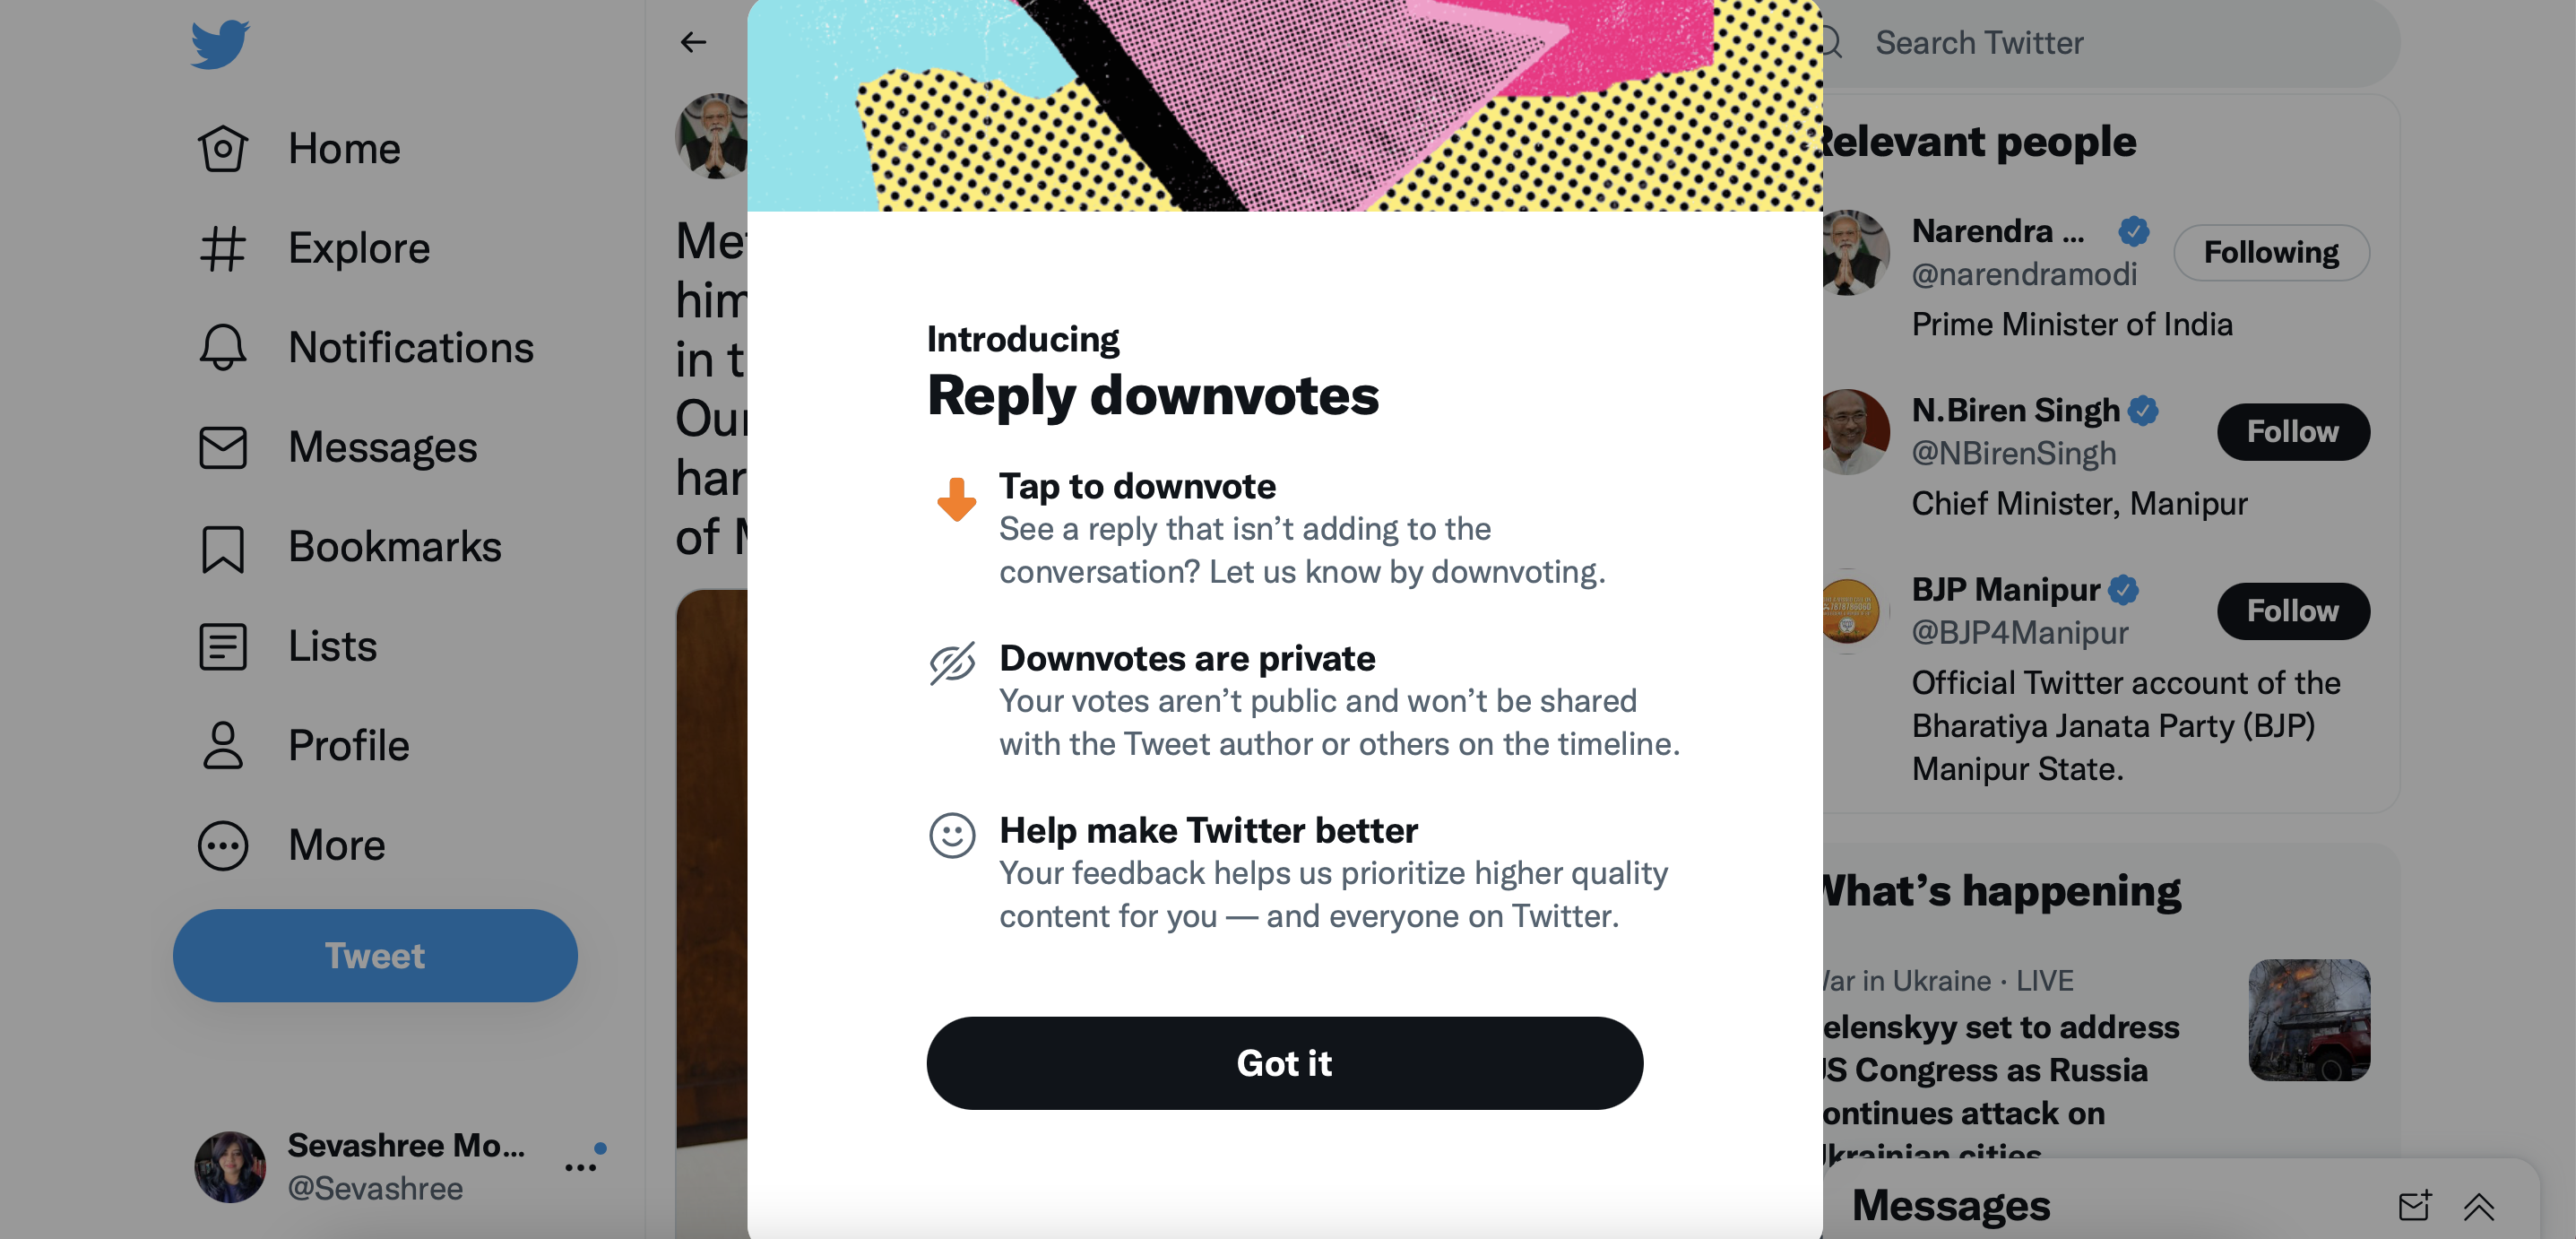 Twitter’s new ‘DOWNVOTE’ feature- 3 things you need to know